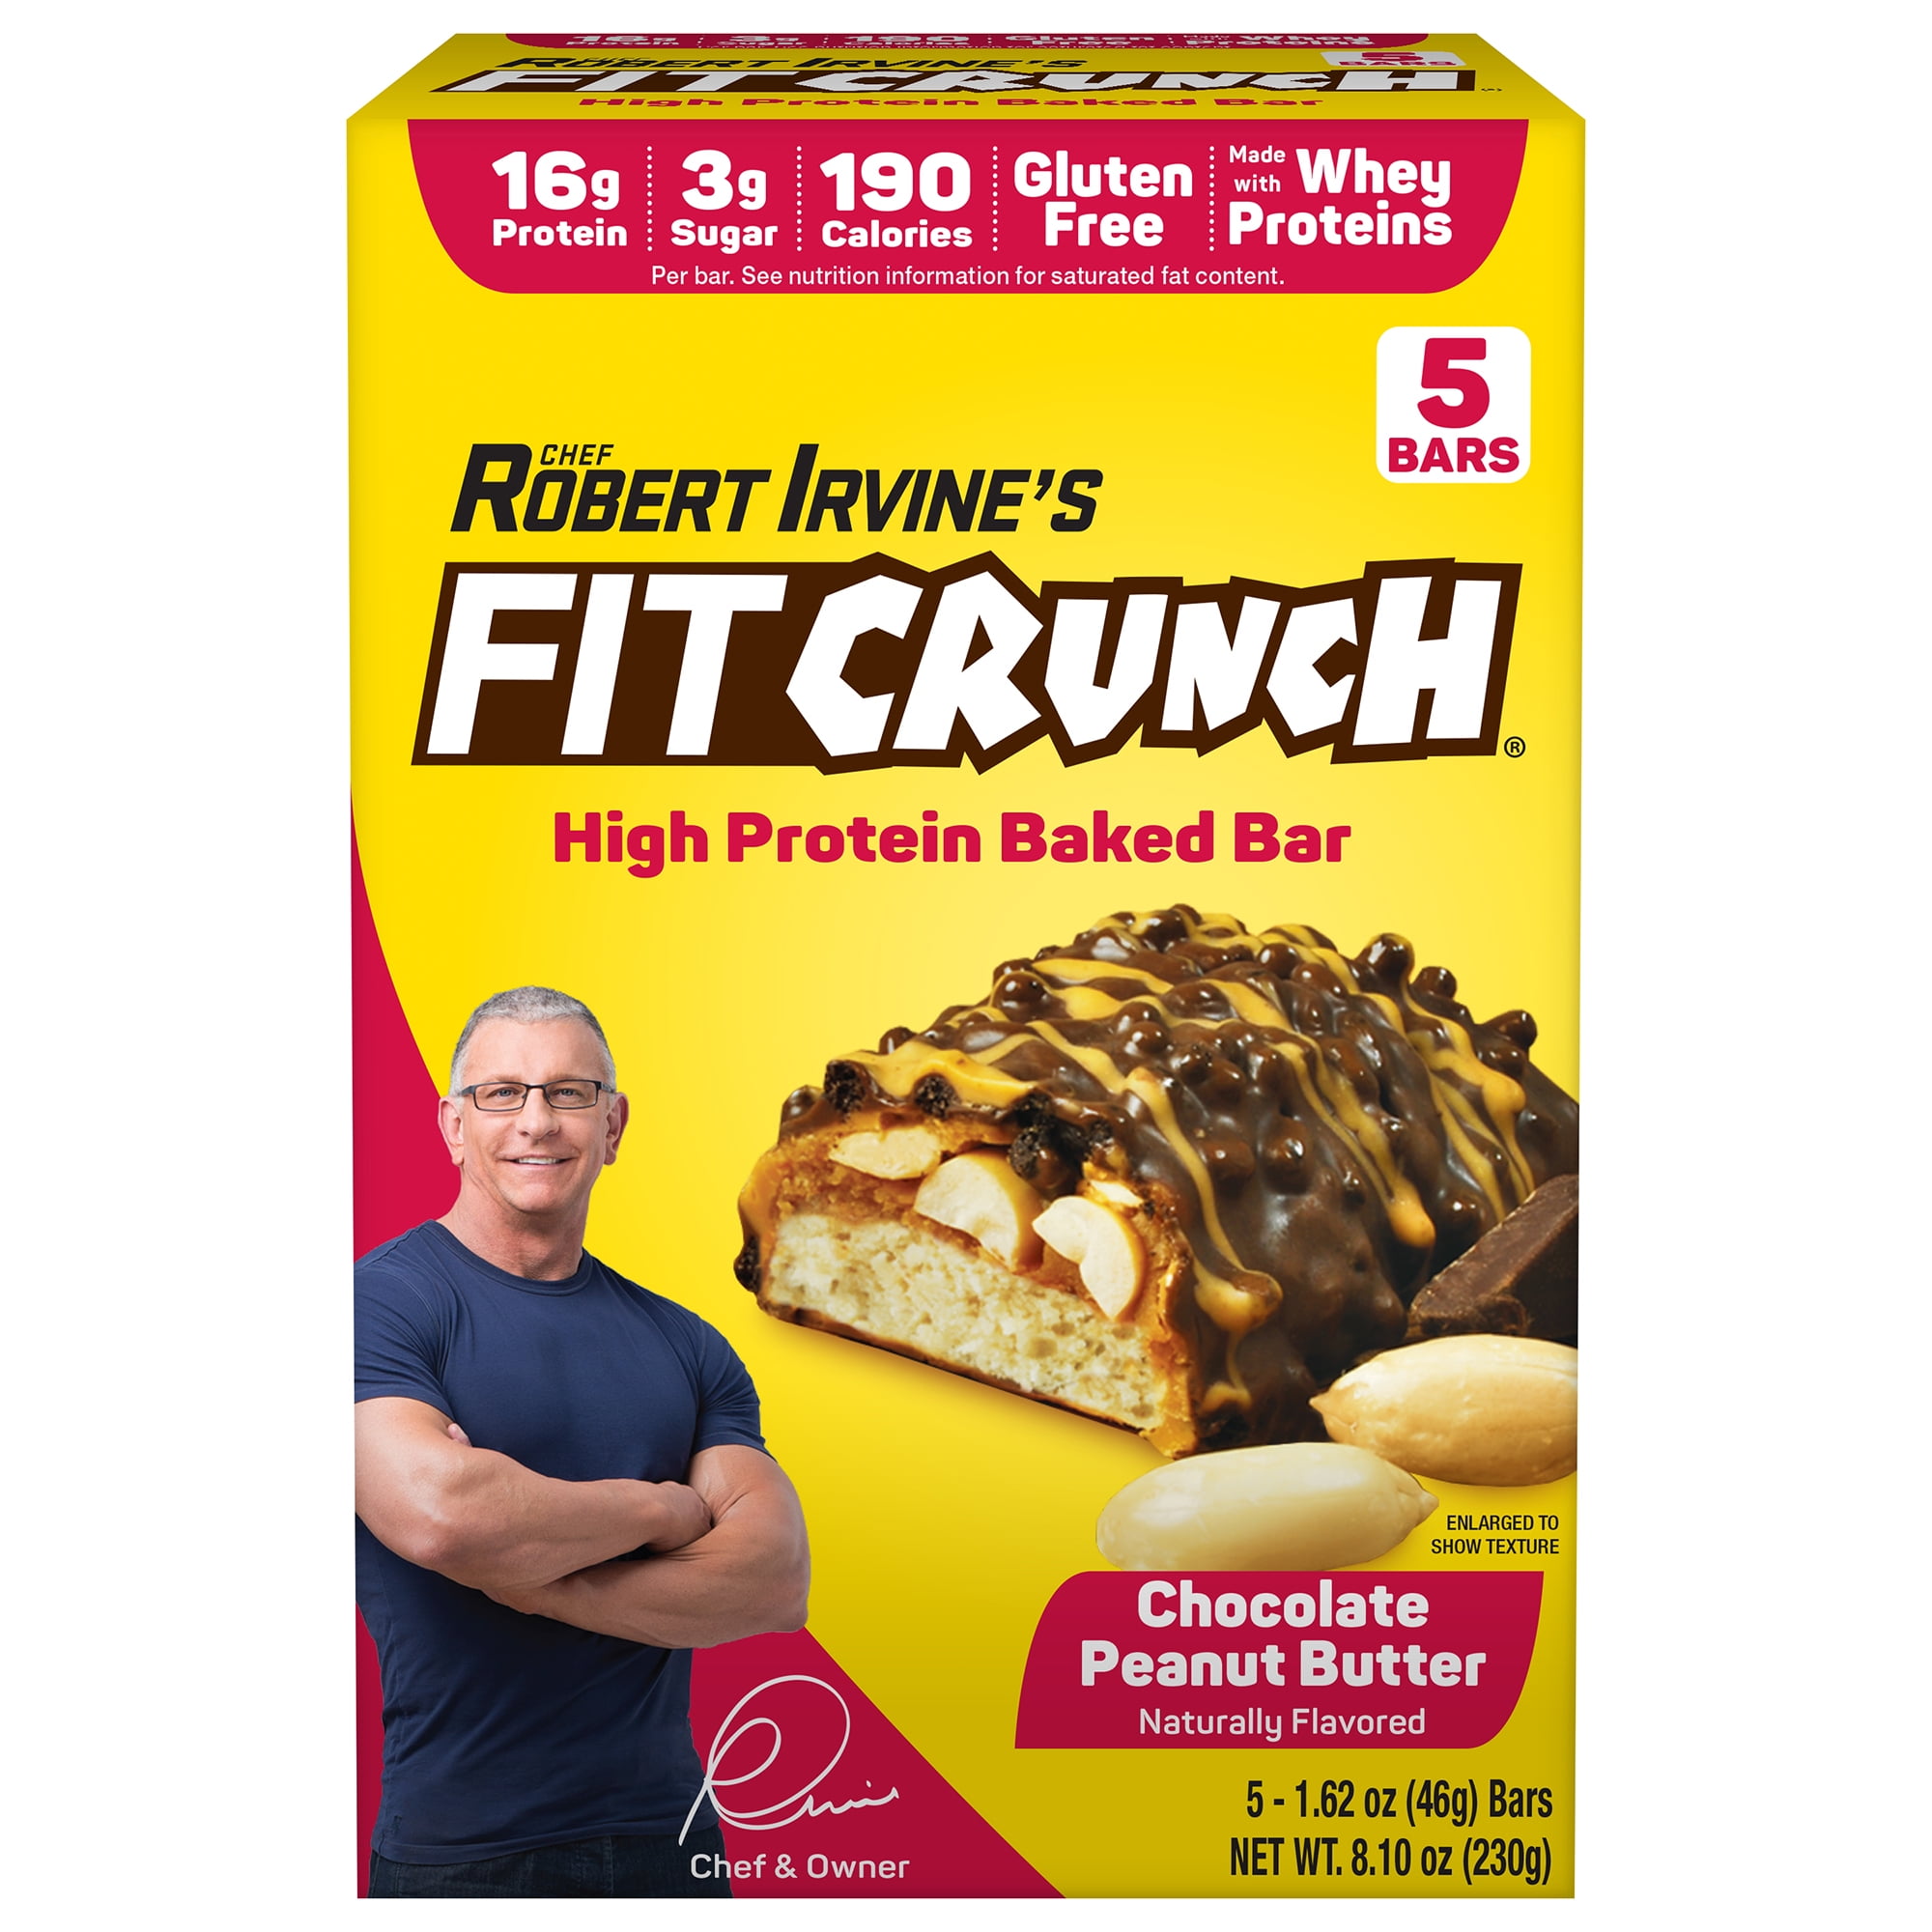 FITCRUNCH Chocolate Peanut Butter, High Protein Baked Bar, 16g